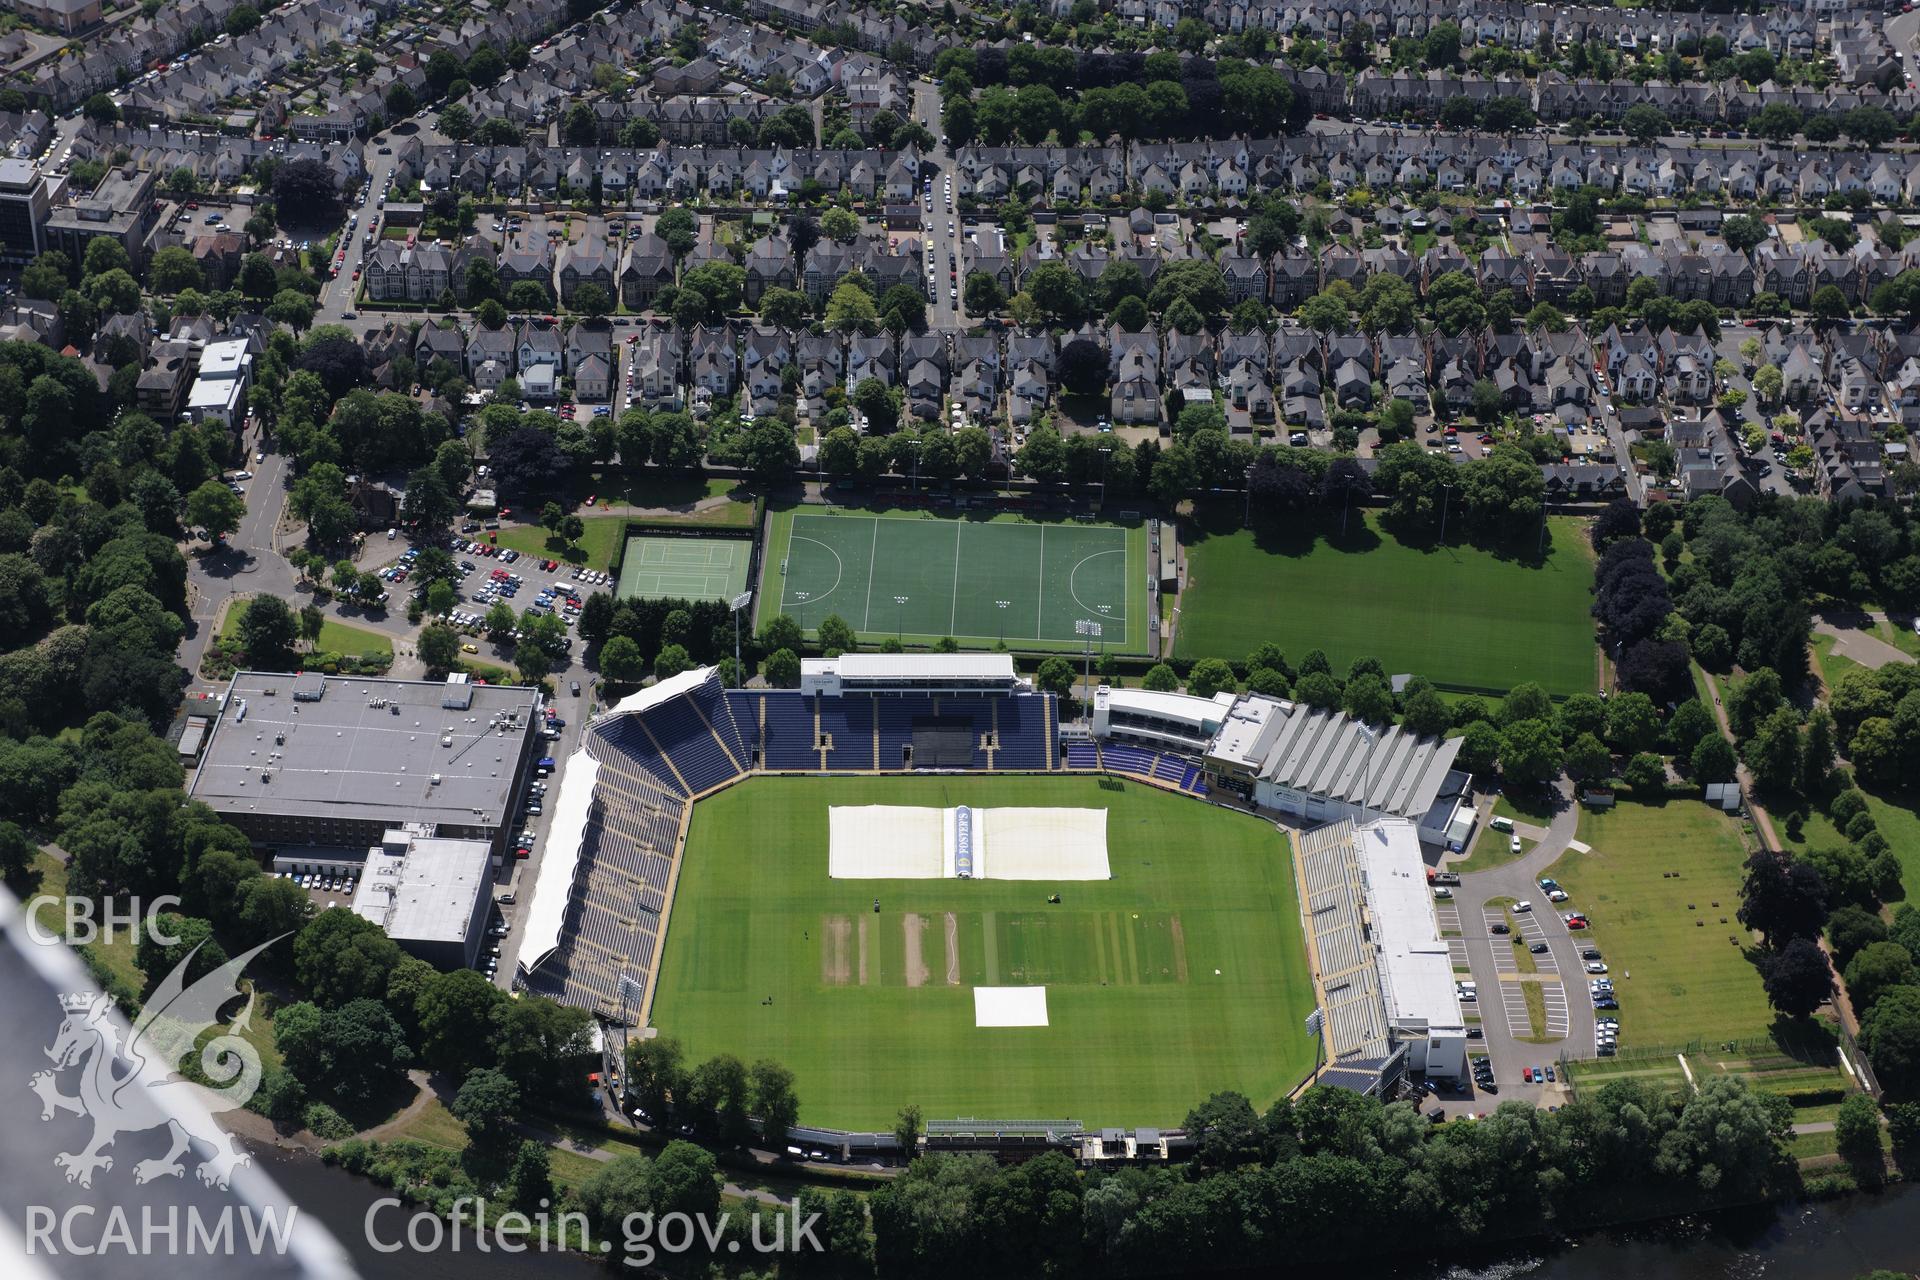 Sophia Gardens Cricket Ground, Cardiff. Oblique aerial photograph taken during the Royal Commission's programme of archaeological aerial reconnaissance by Toby Driver on 29th June 2015.